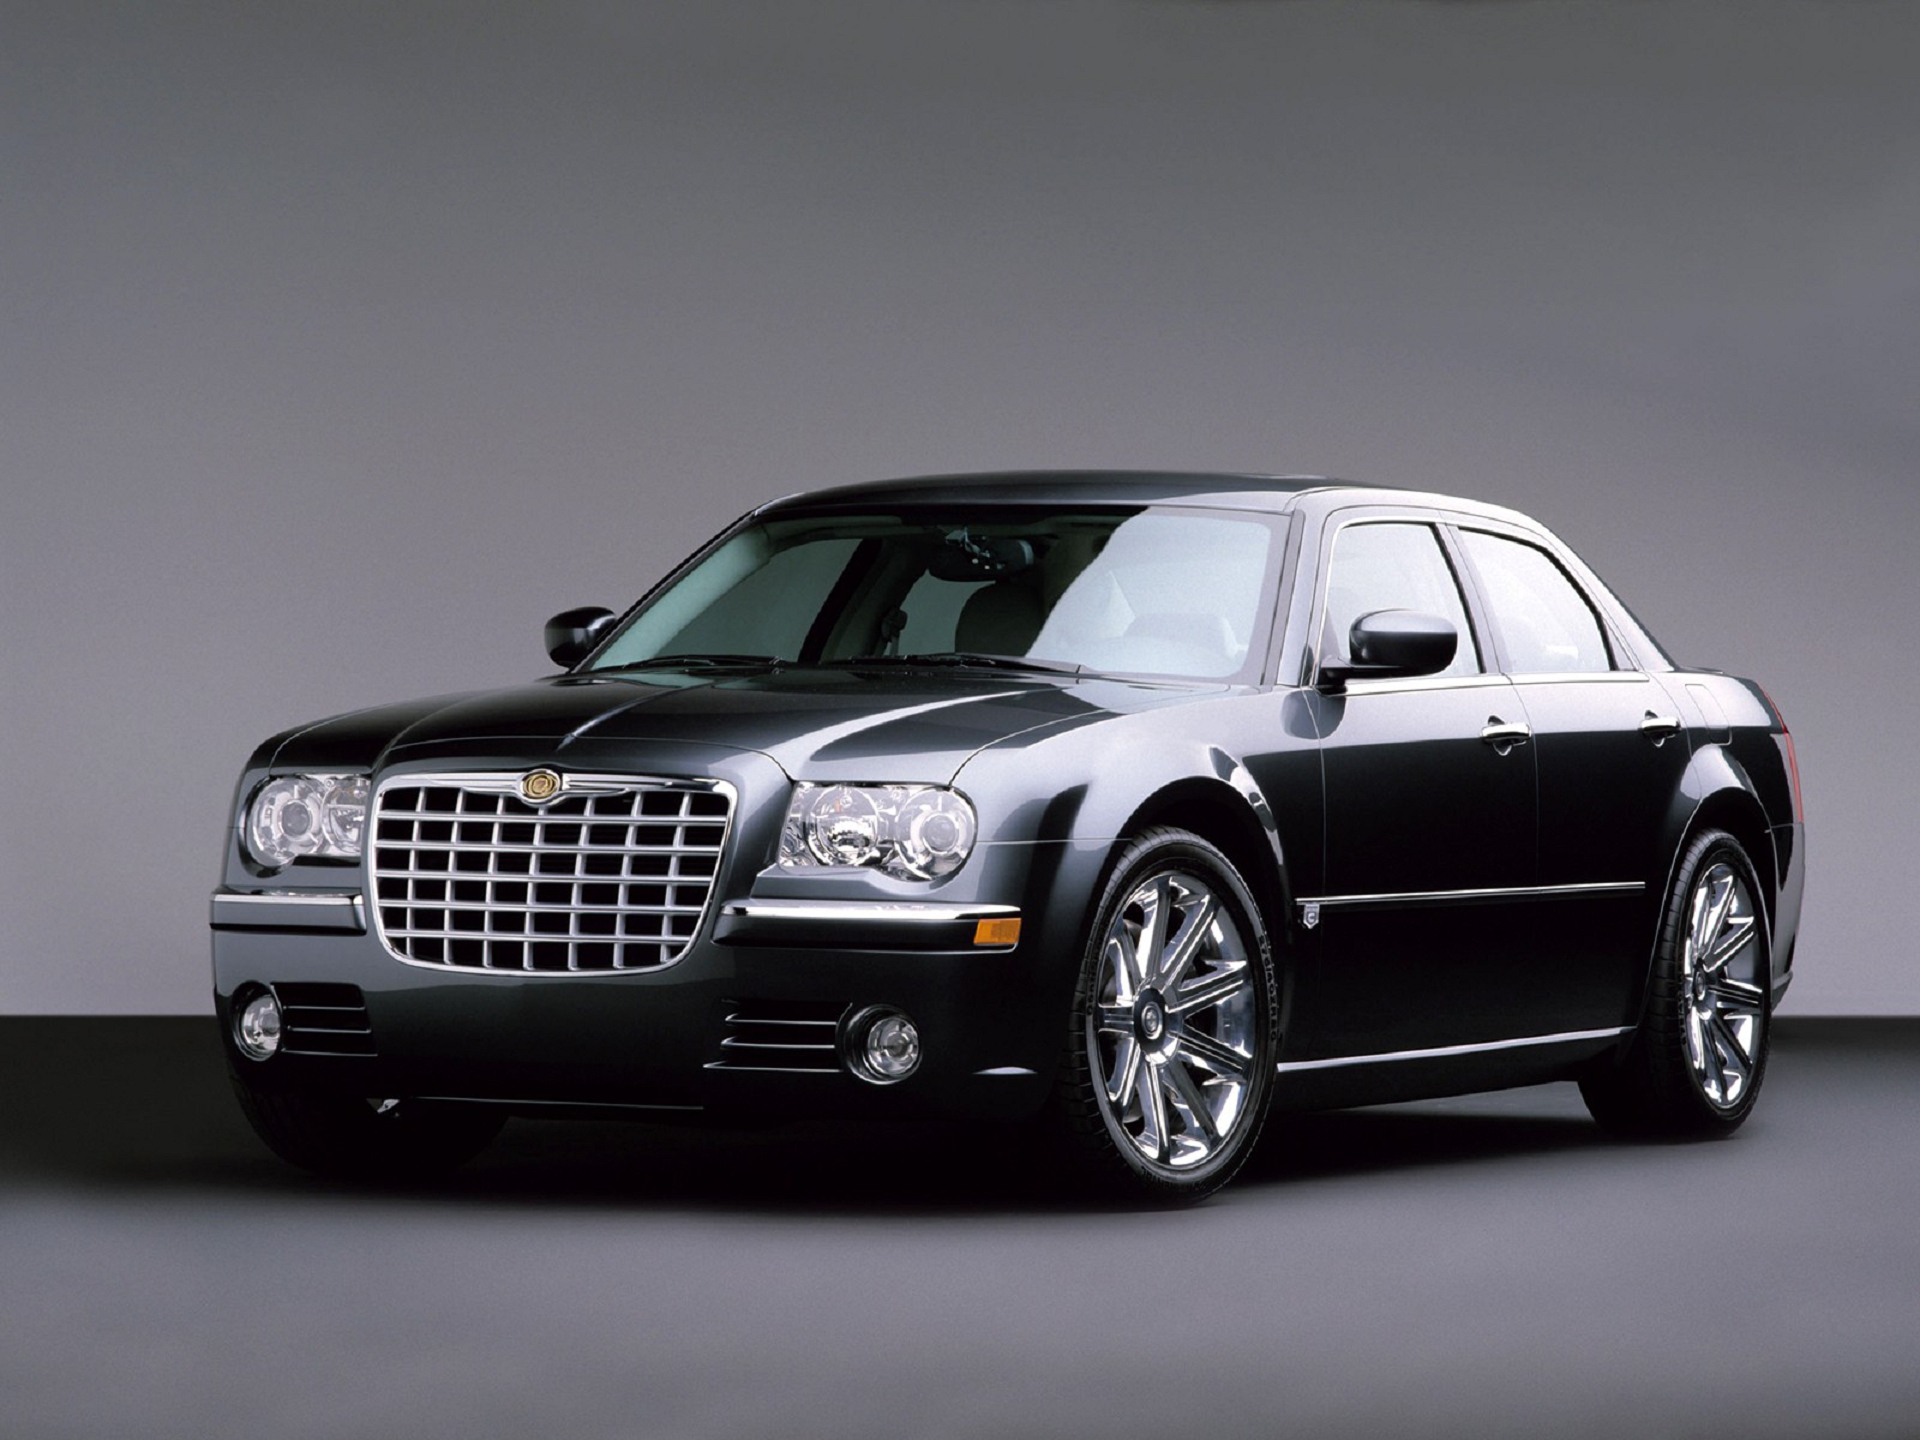 Chrysler 300 Wallpapers Images Photos Pictures Backgrounds
